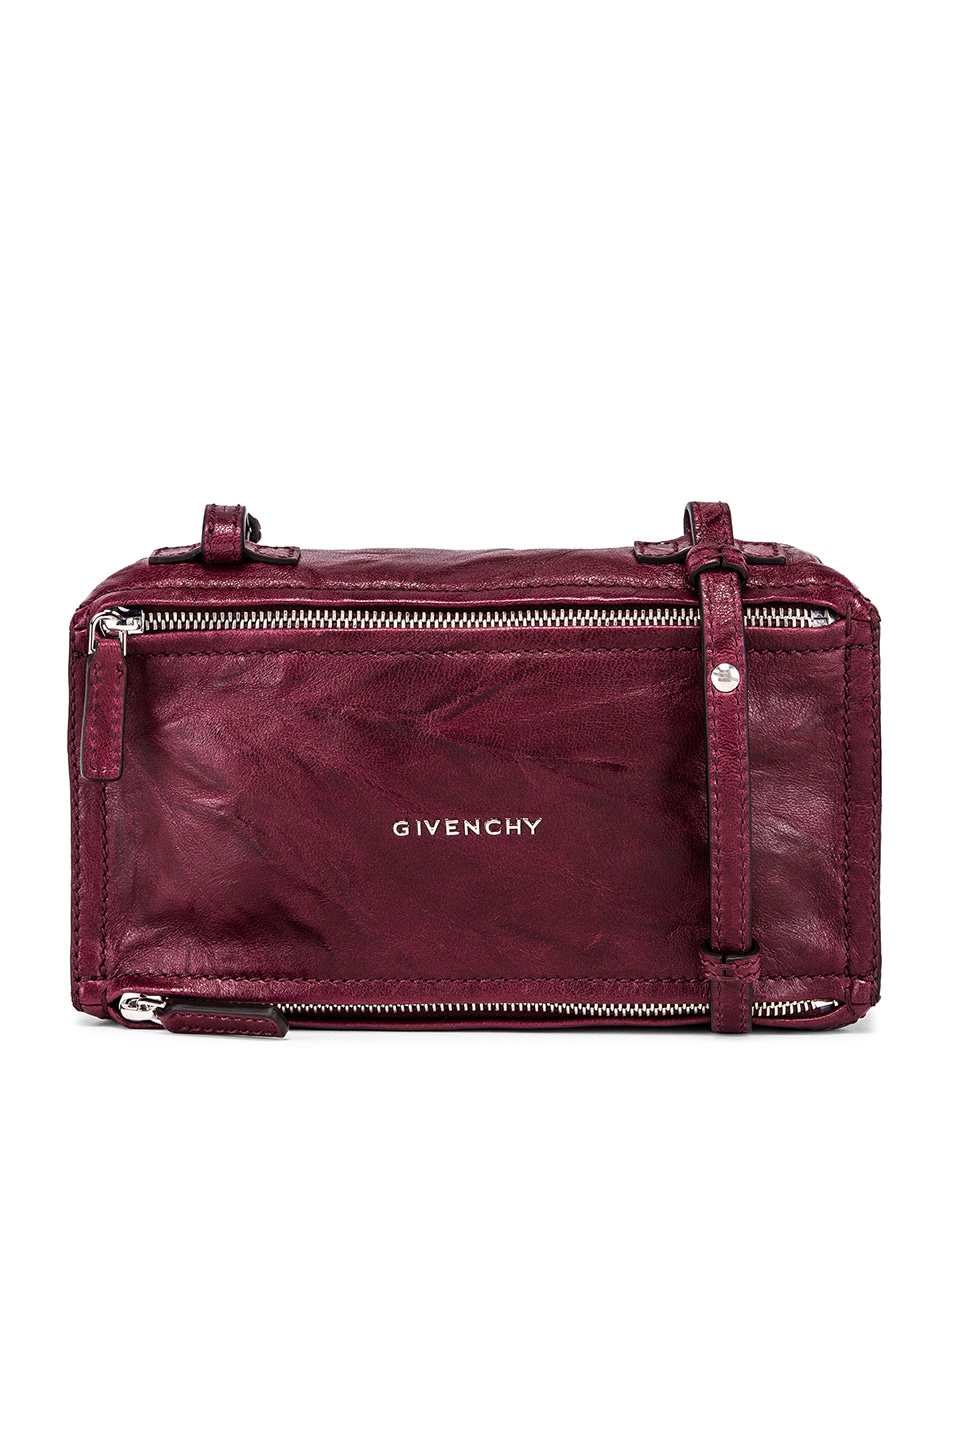 Image 1 of Givenchy Old Pepe Mini Pandora Bag in Aubergine